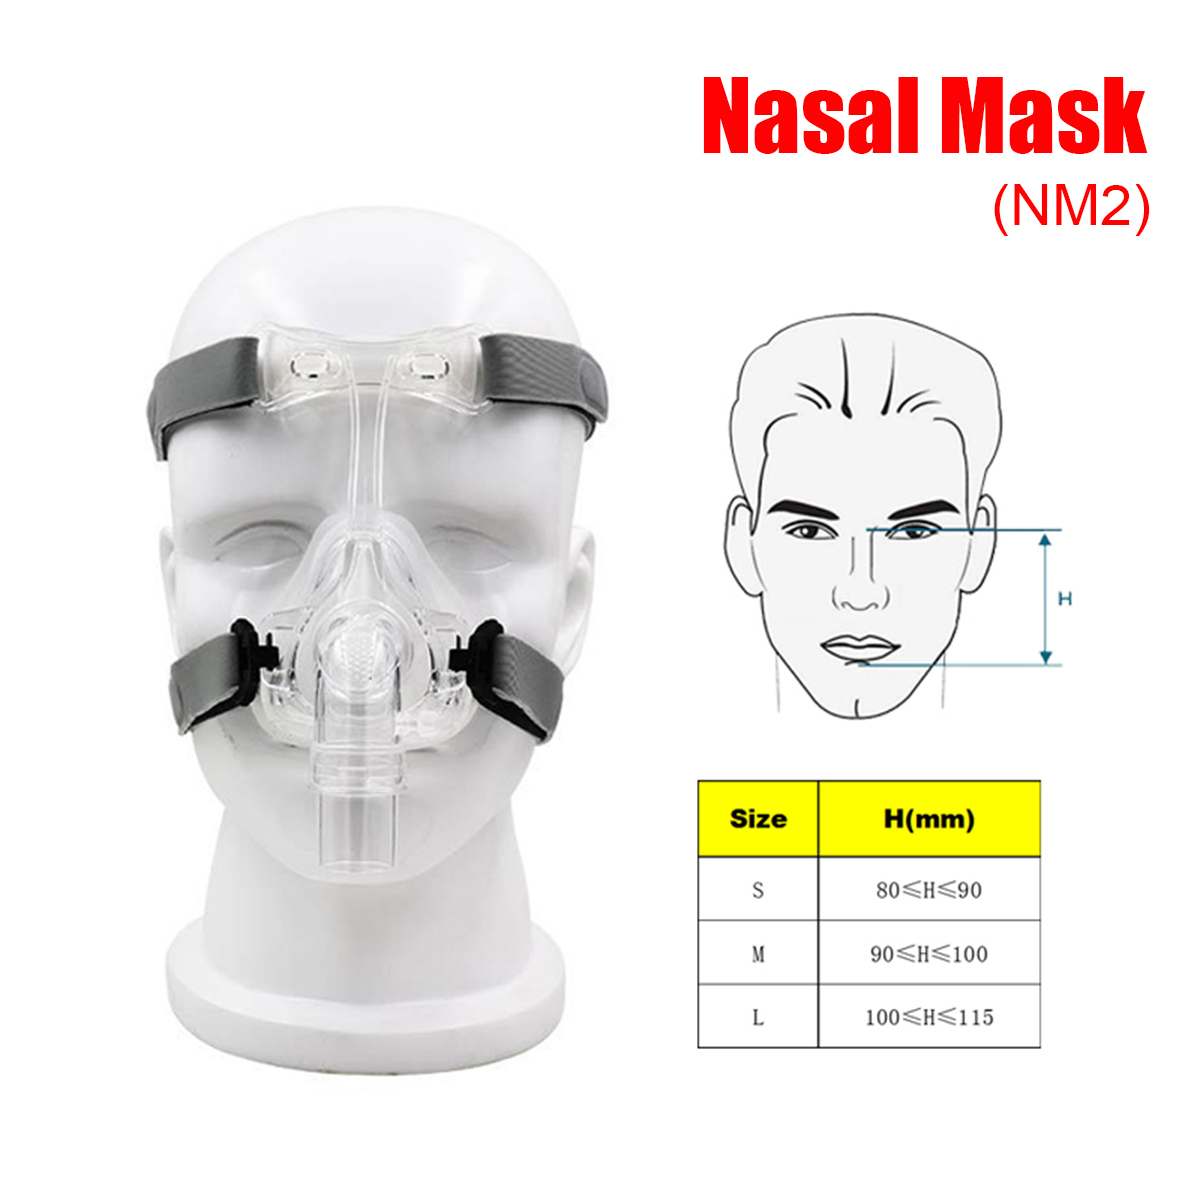 Nasal-Mask-NM2-For-CPAP-Masks-Interface-Sleep-Snore-Strap-w-Headgear-1347205-1